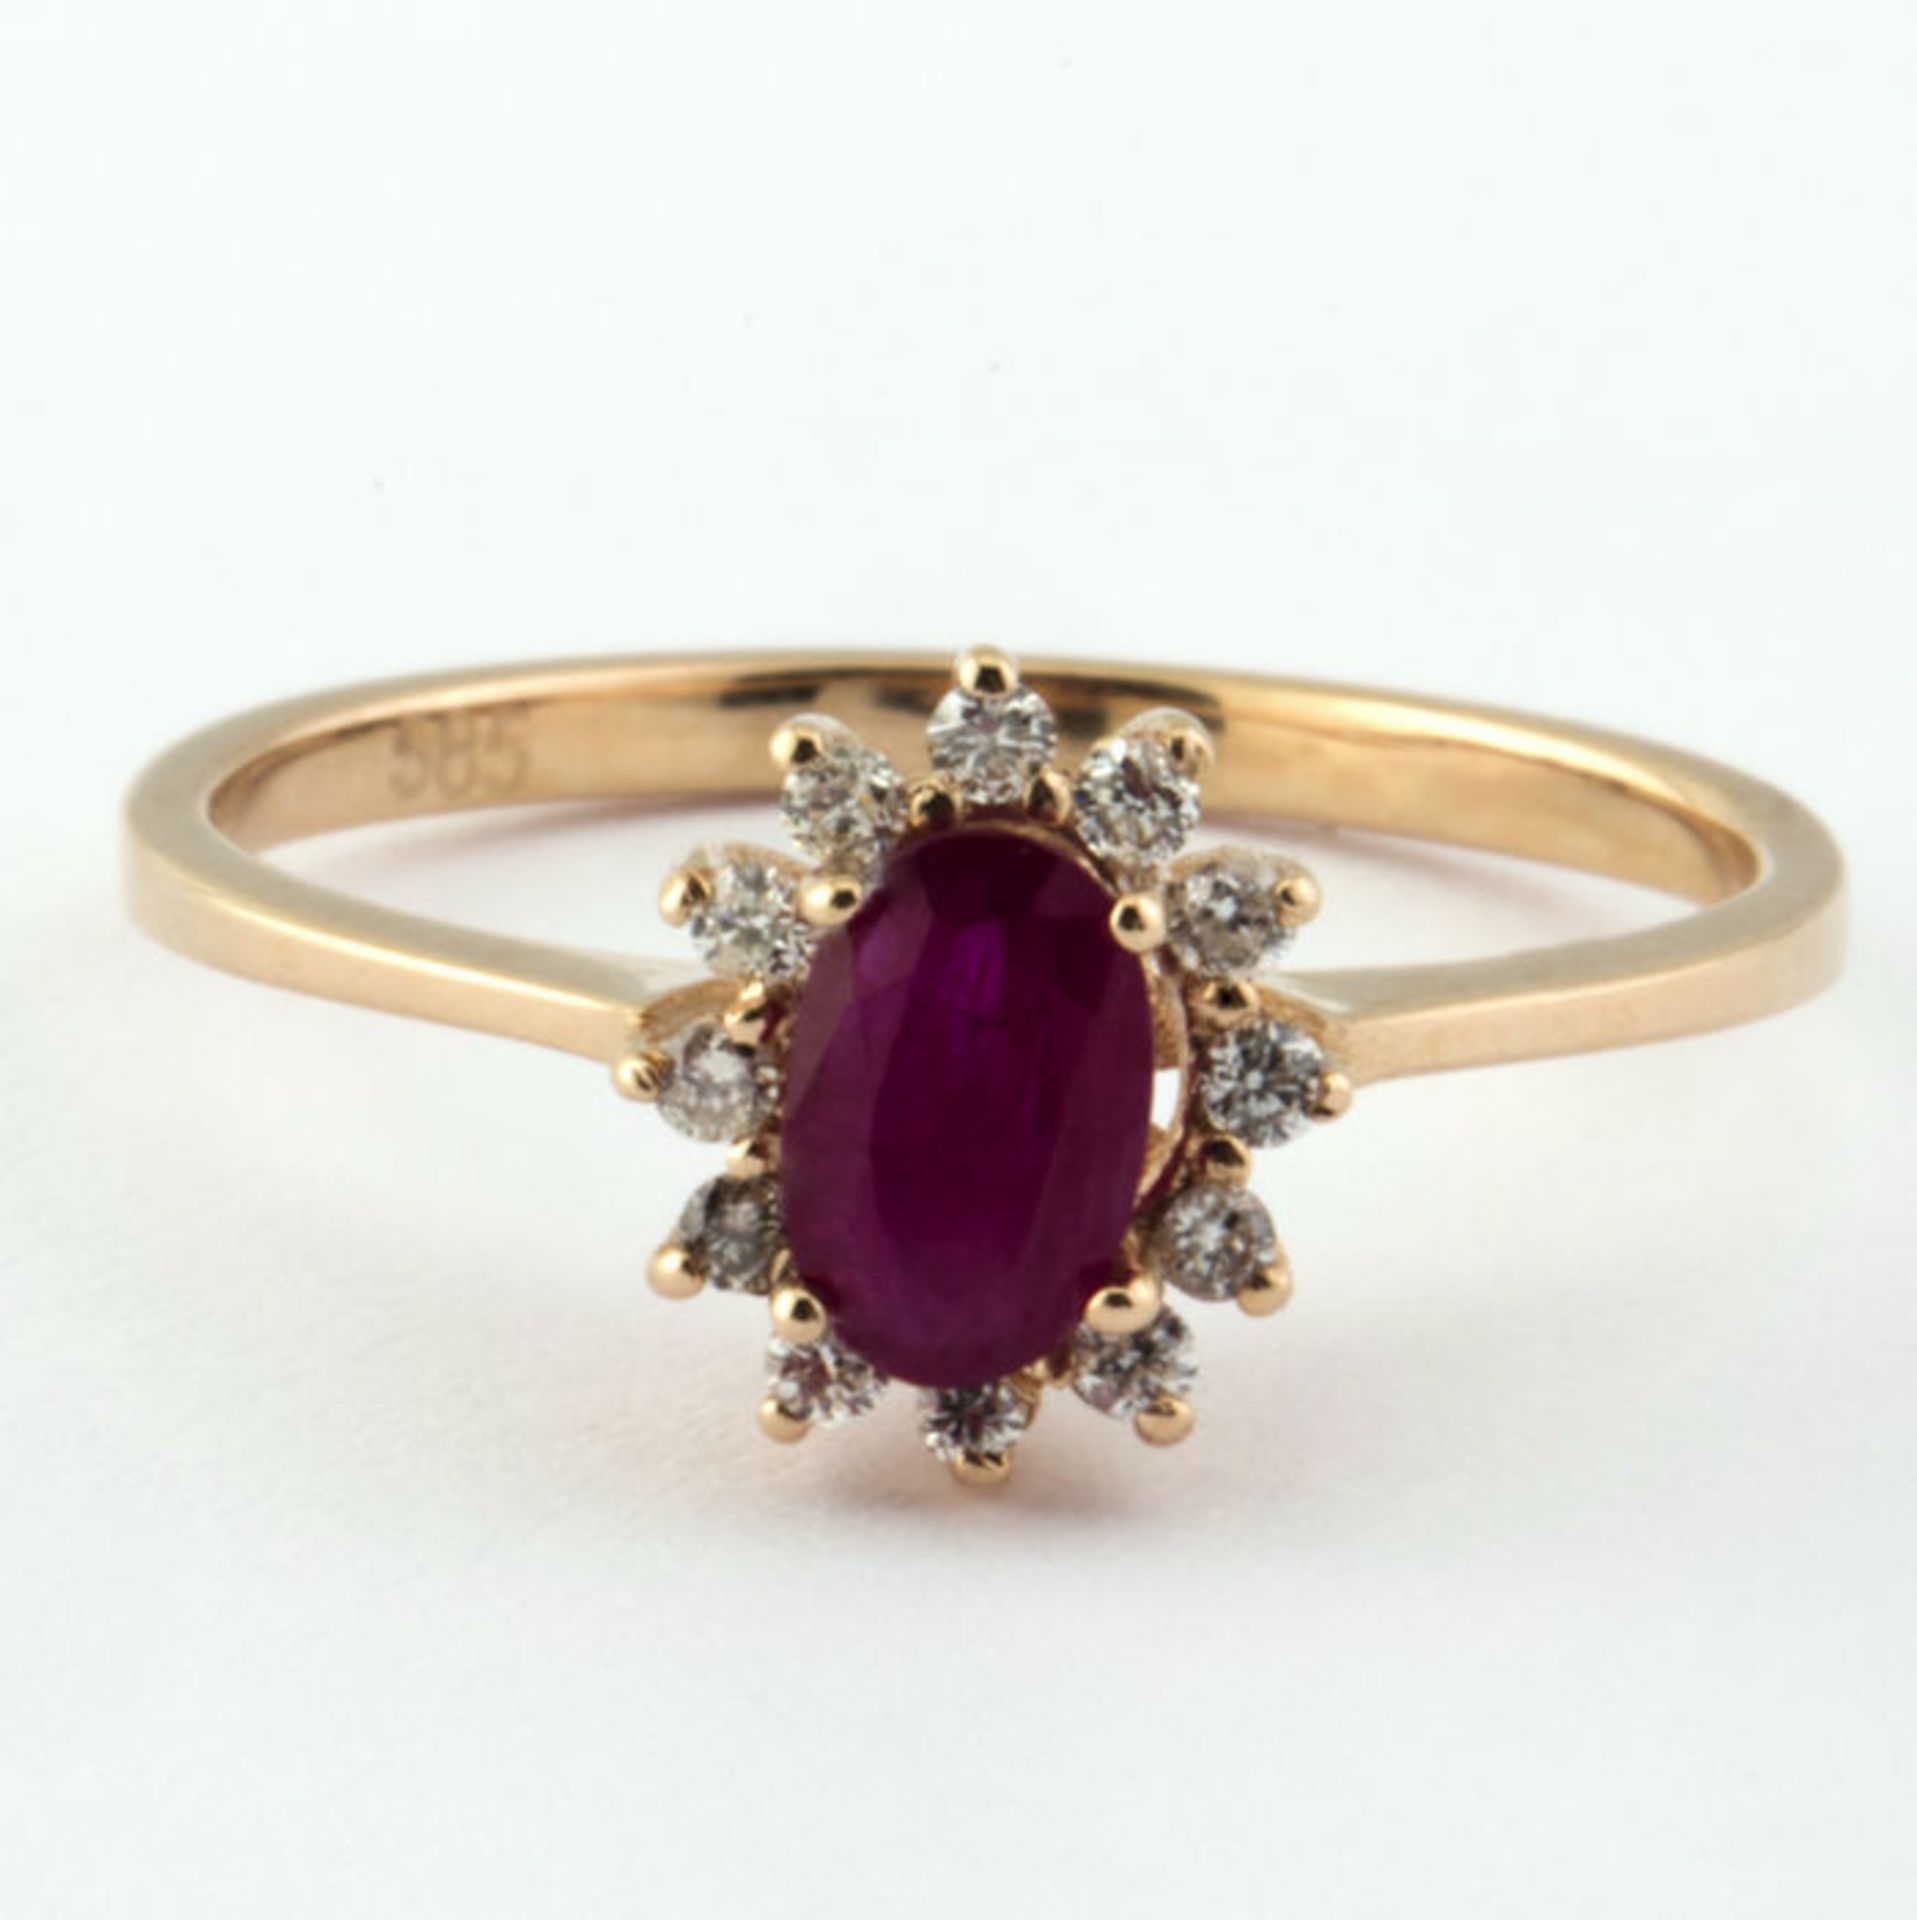 14K Pink Gold Cluster Ring Total:0,65ct,12 Pcs Brilliant Cut Round Diamond and 1 Natural Ruby - Image 2 of 6